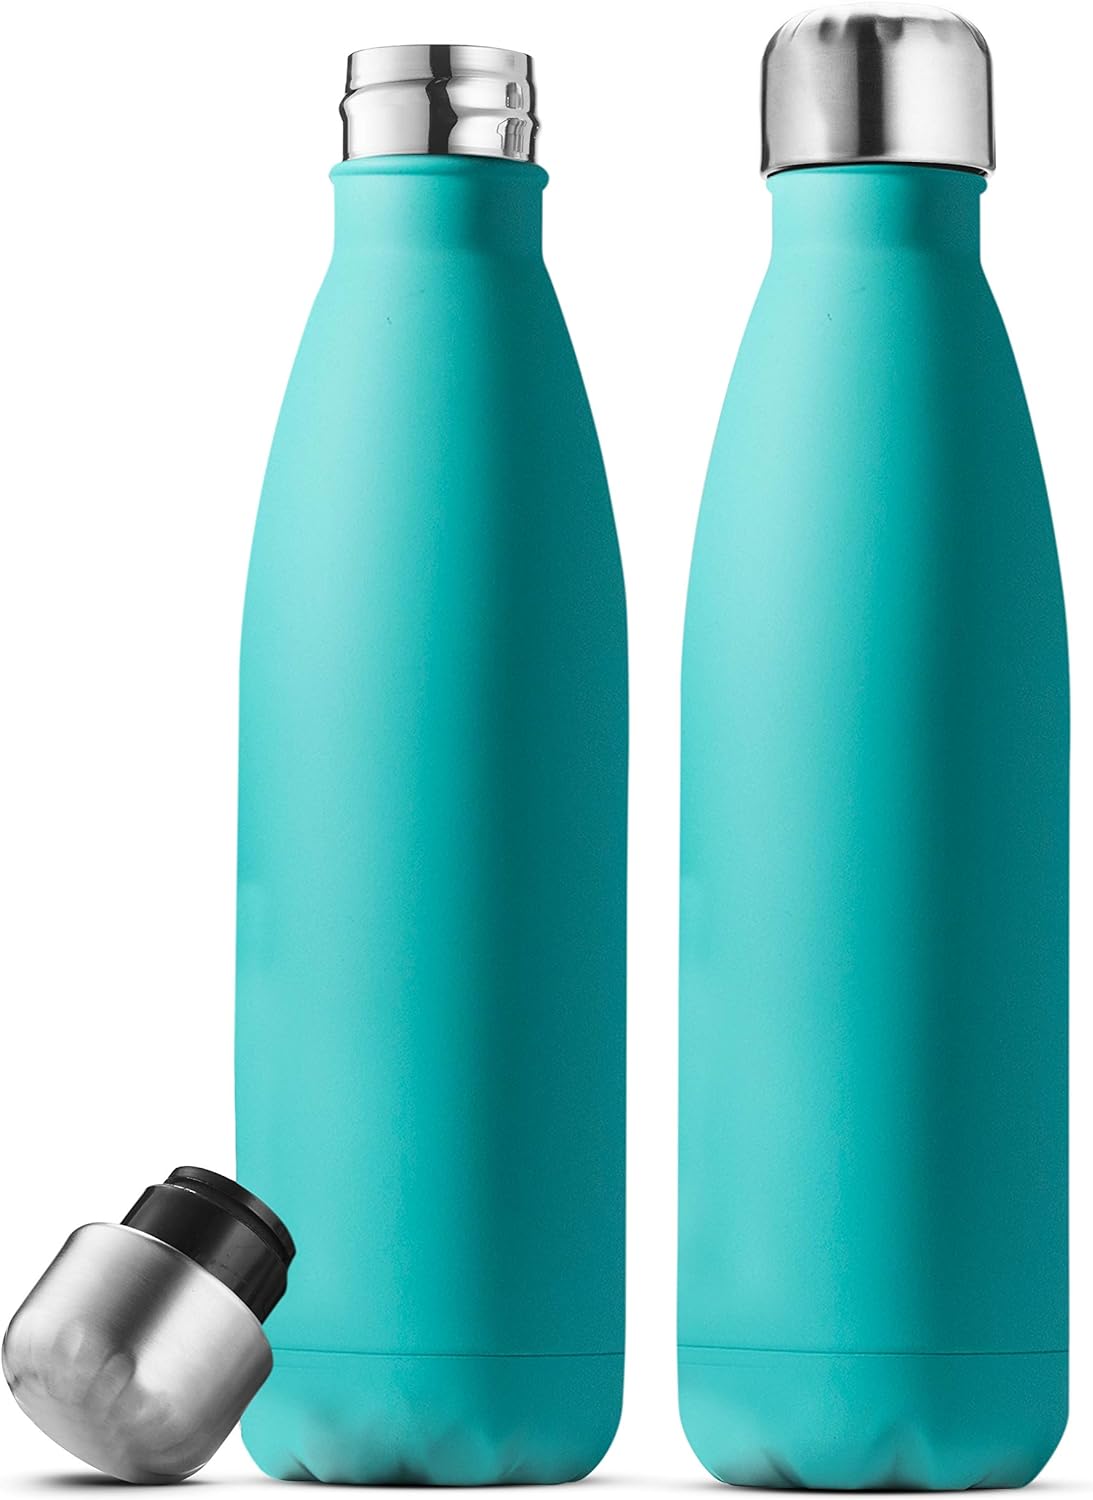 Triple Insulated Stainless Steel Water Bottle (set of 2) 17 Ounce, Sleek Insulated Water Bottles, Keeps Hot and Cold, 100% LeakProof Lids, Sweat Proof Water Bottles, Great for Travel, Picnic& Camping.